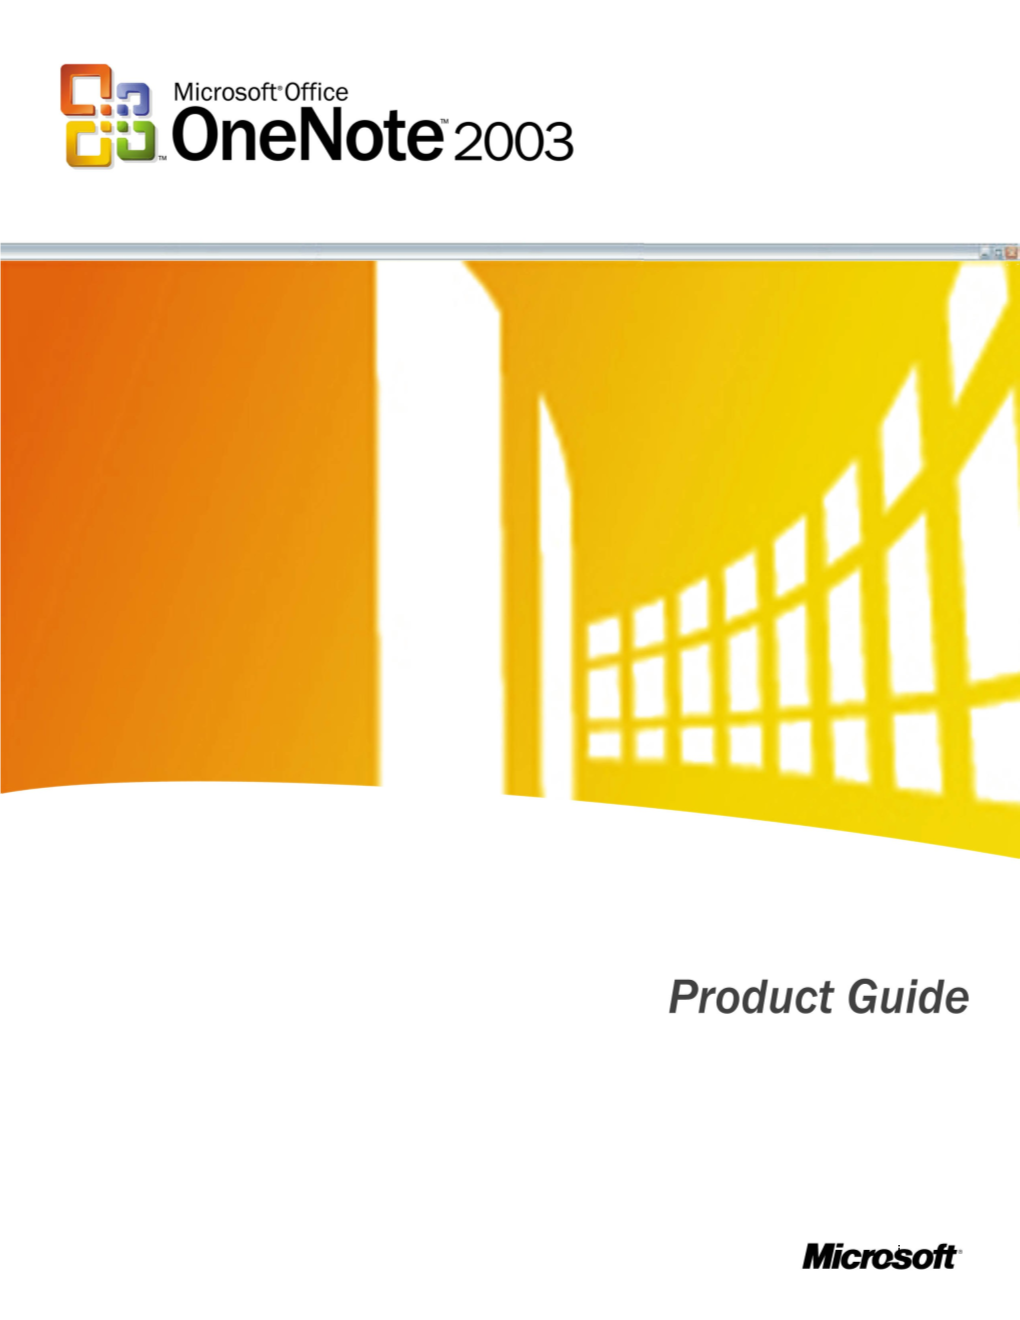 An Overview of Microsoft Office Onenote 2003